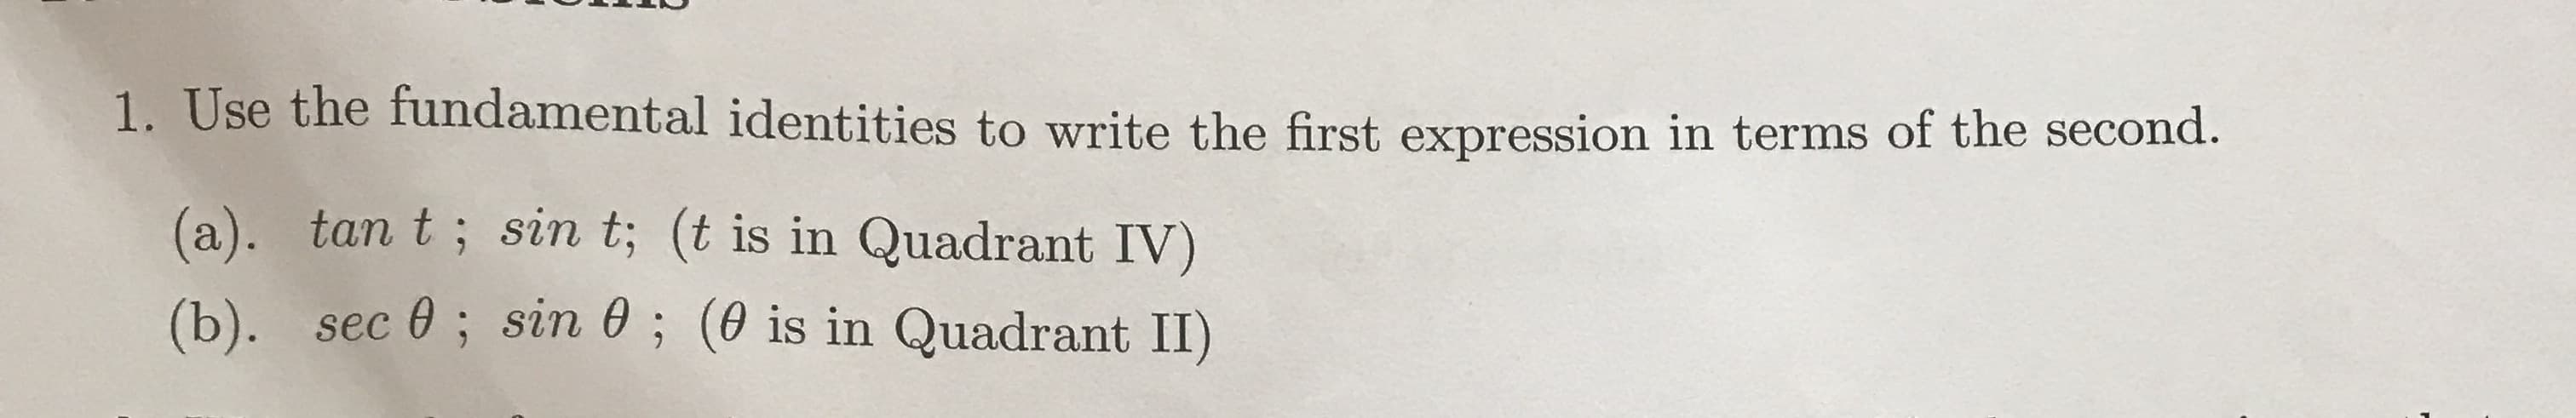 1. Use the fundamental identities to write the first expression in terms of the second.
(a). tan t; sin t; (t is in Quadrant IV)
(b). sec 0; sin 0; (0 is in Quadrant II)
